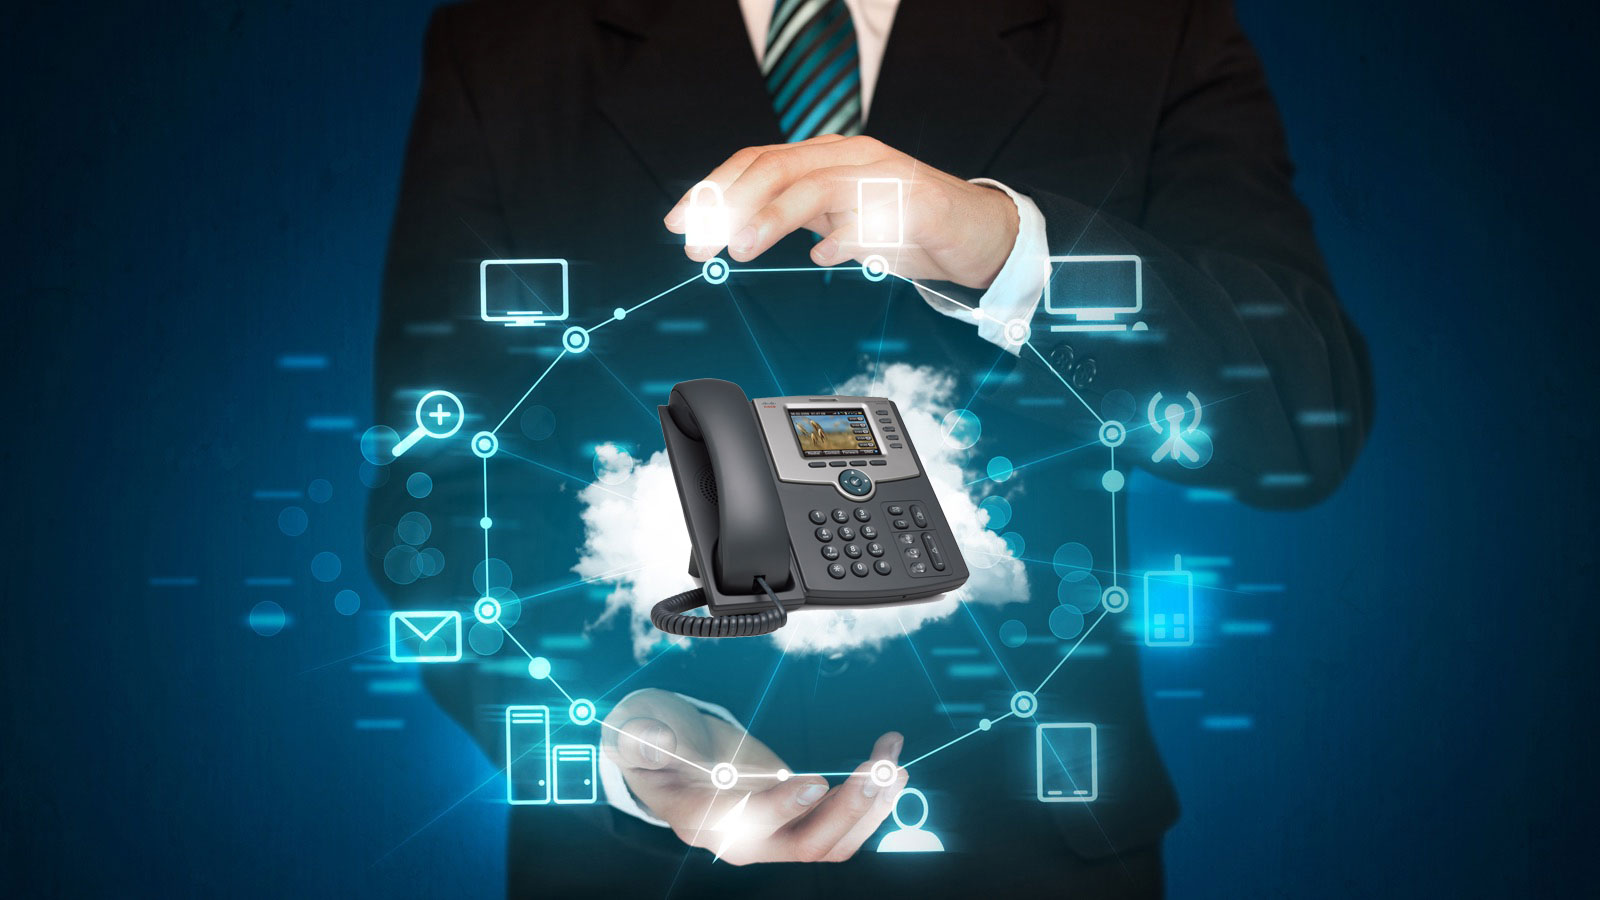 IP Telephone Systems